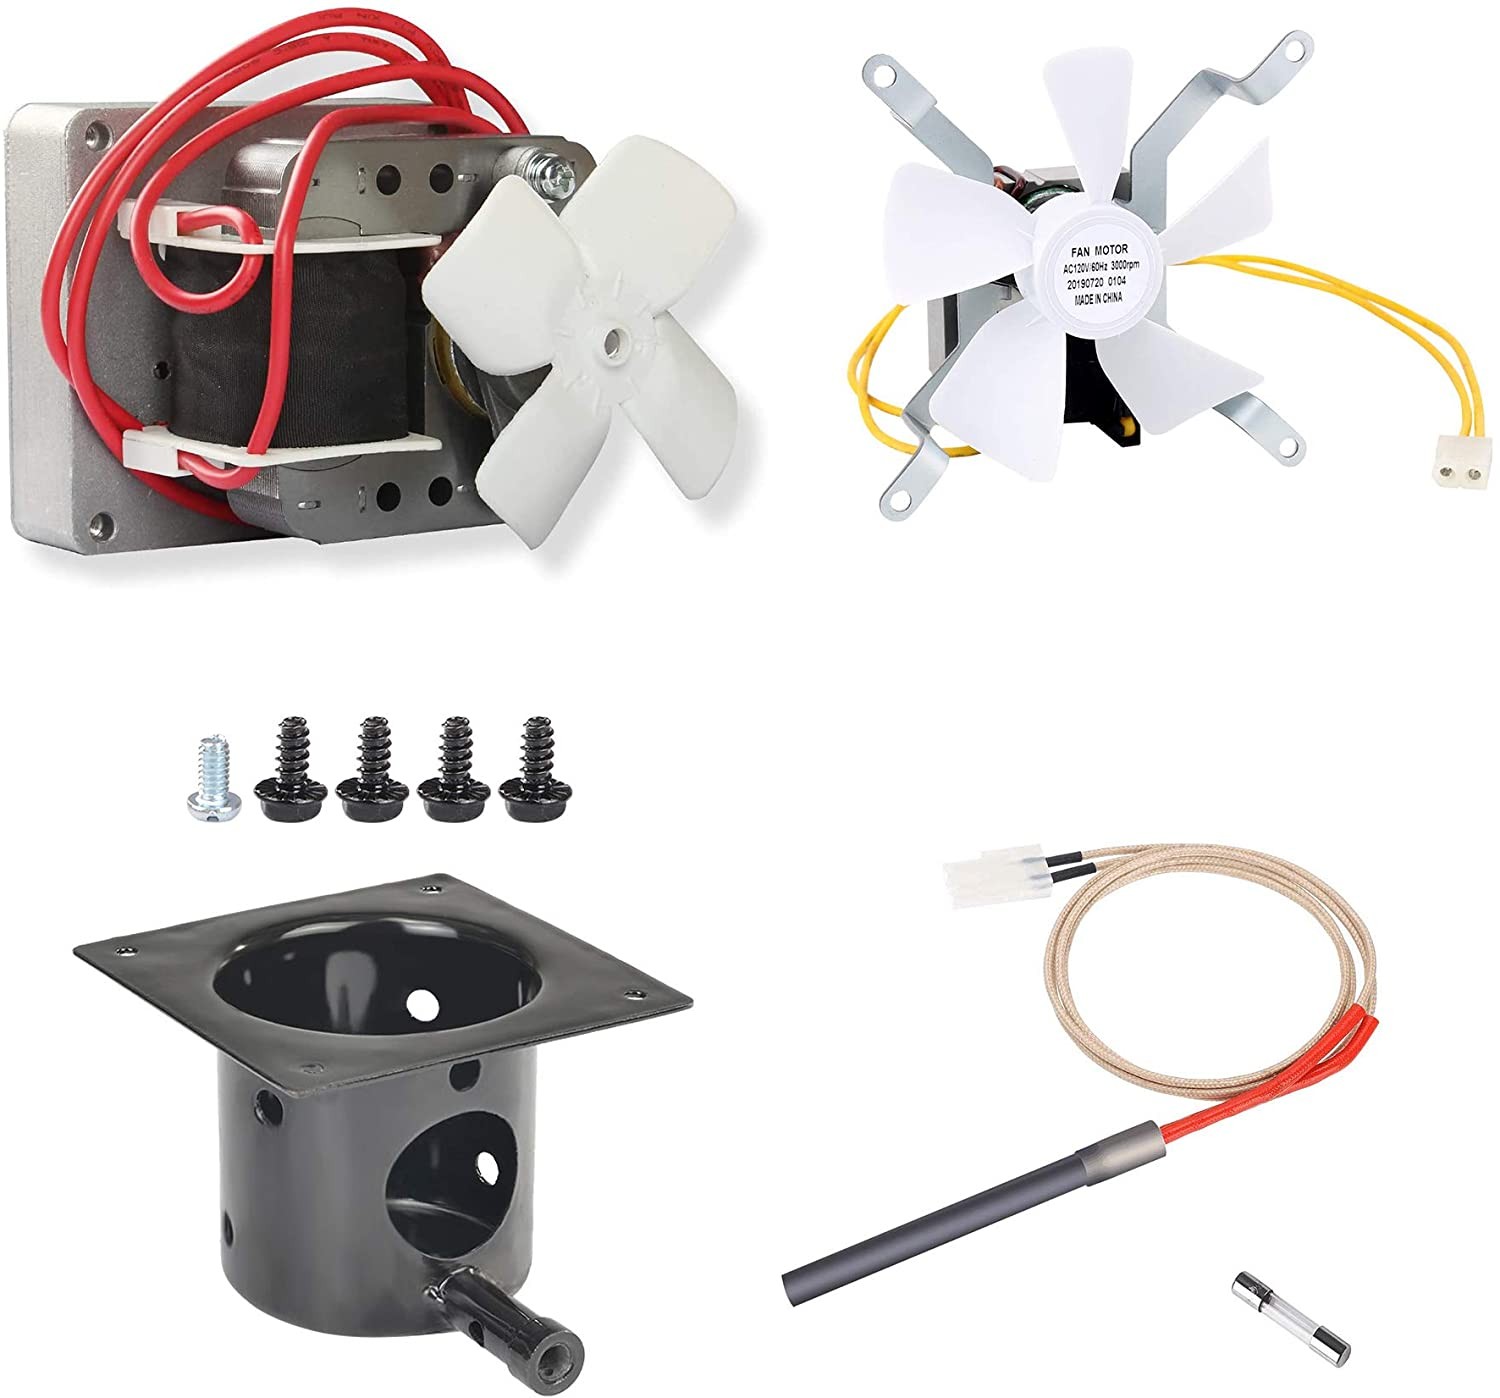 Auger Motor,Grill Induction Fan Kit, Fire Burn Pot and Hot Rod Ignitor,Replacement Parts with Screws and Fuse for Pit Boss and Traeger Wood Pellet Grill, Ignitor Kit.